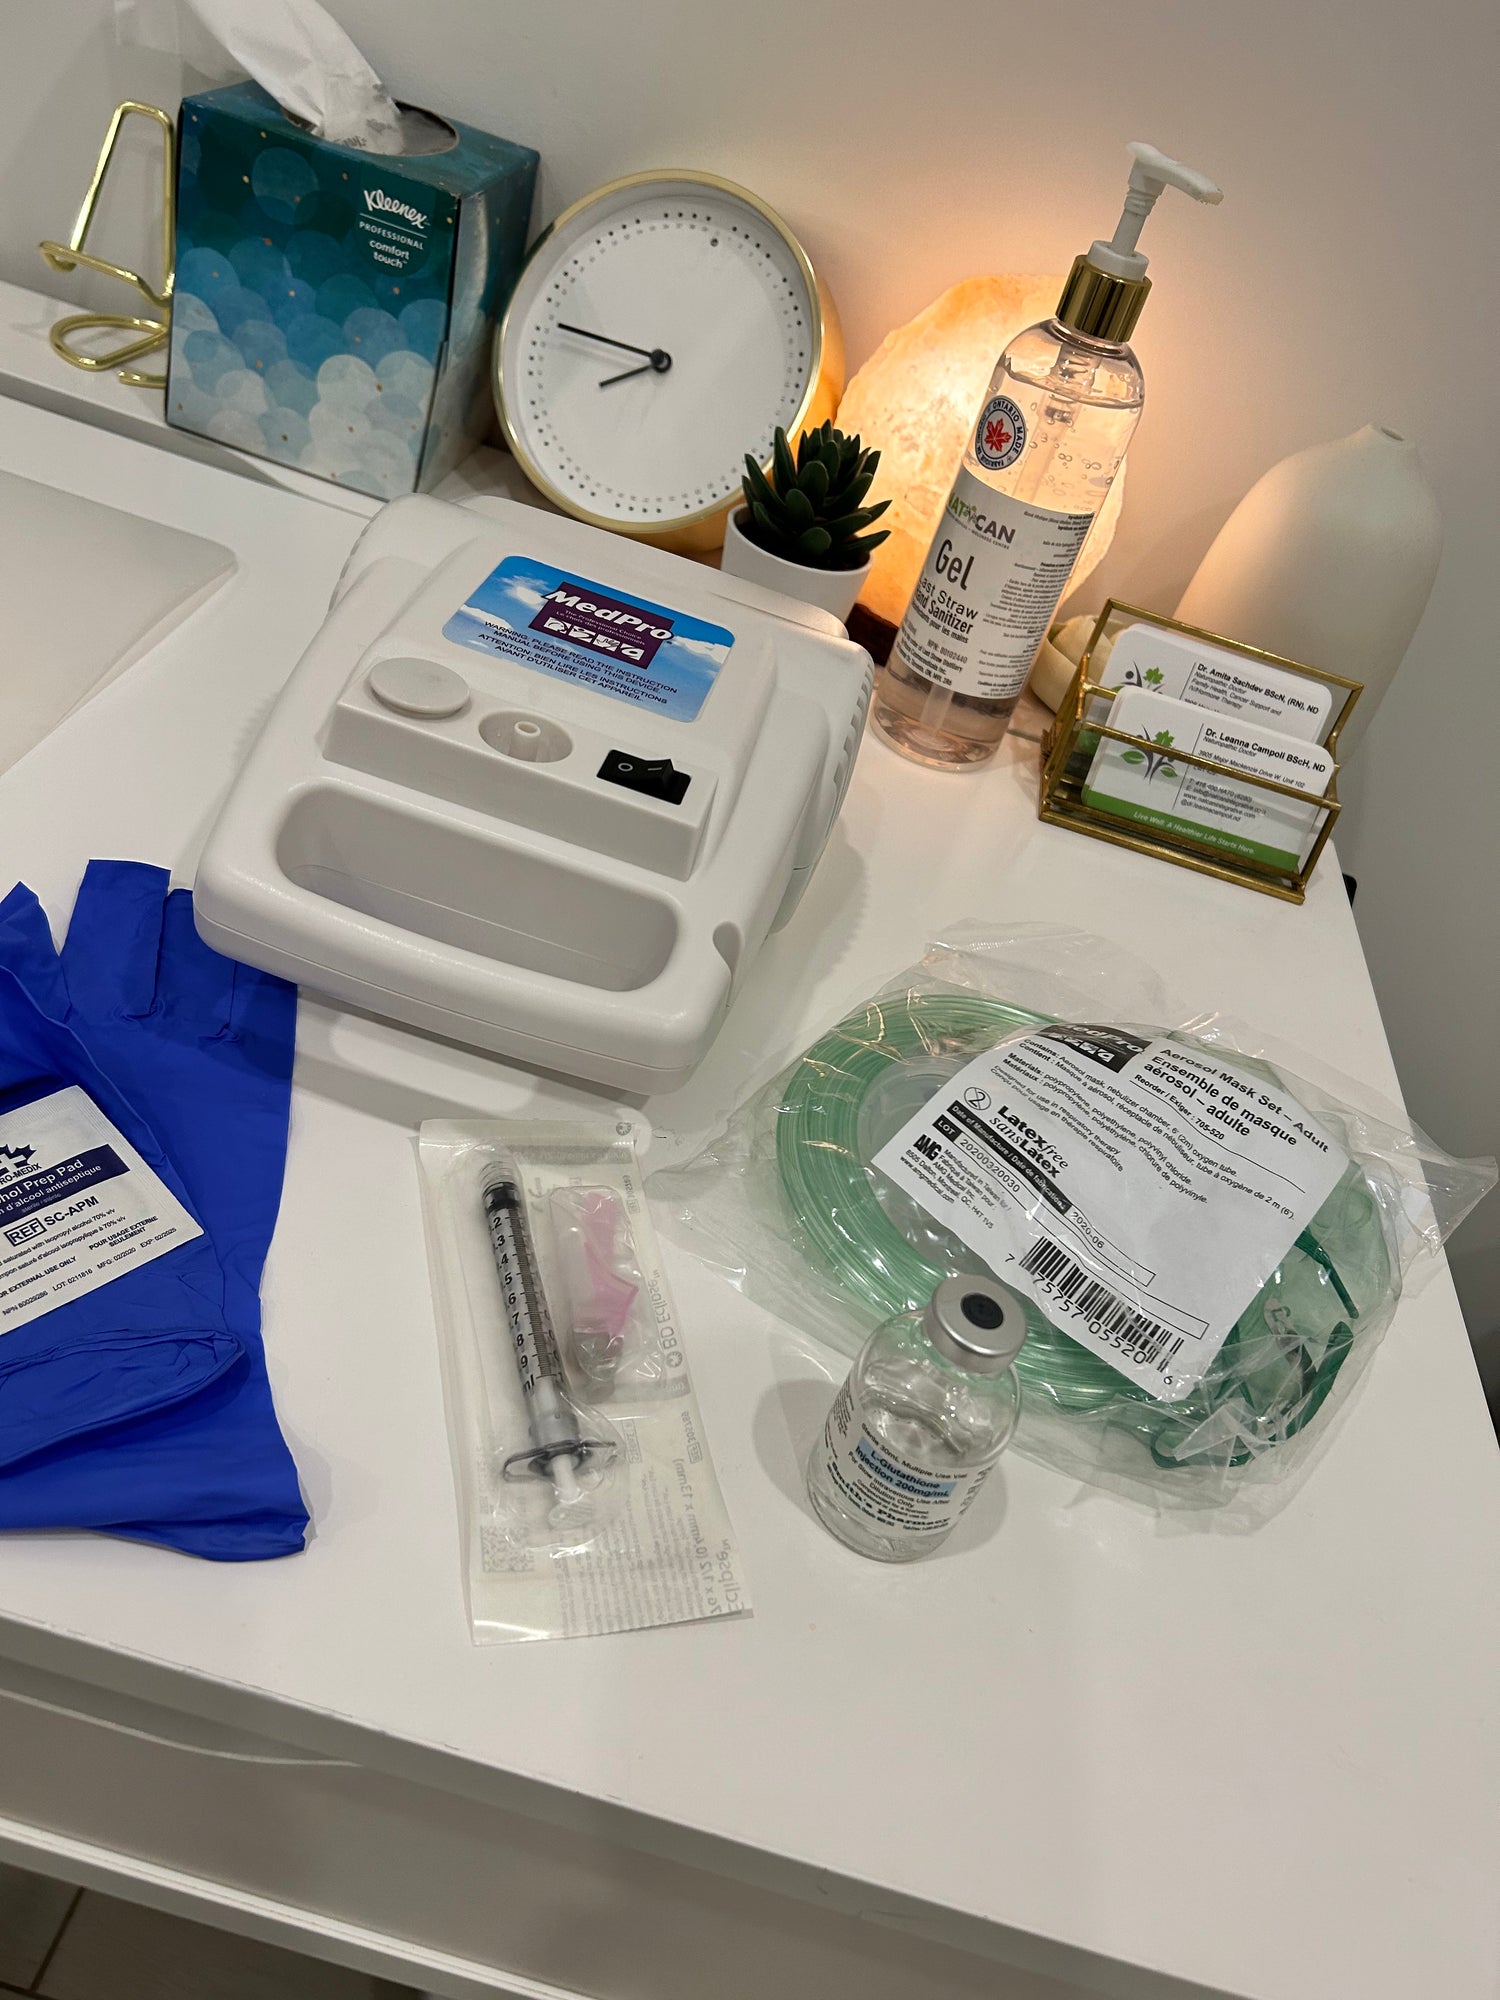 A health care table is covered with various treatment tools, including a syringe, latex gloves, and a tube. These items are designed to treat asthma and other chronic illnesses.